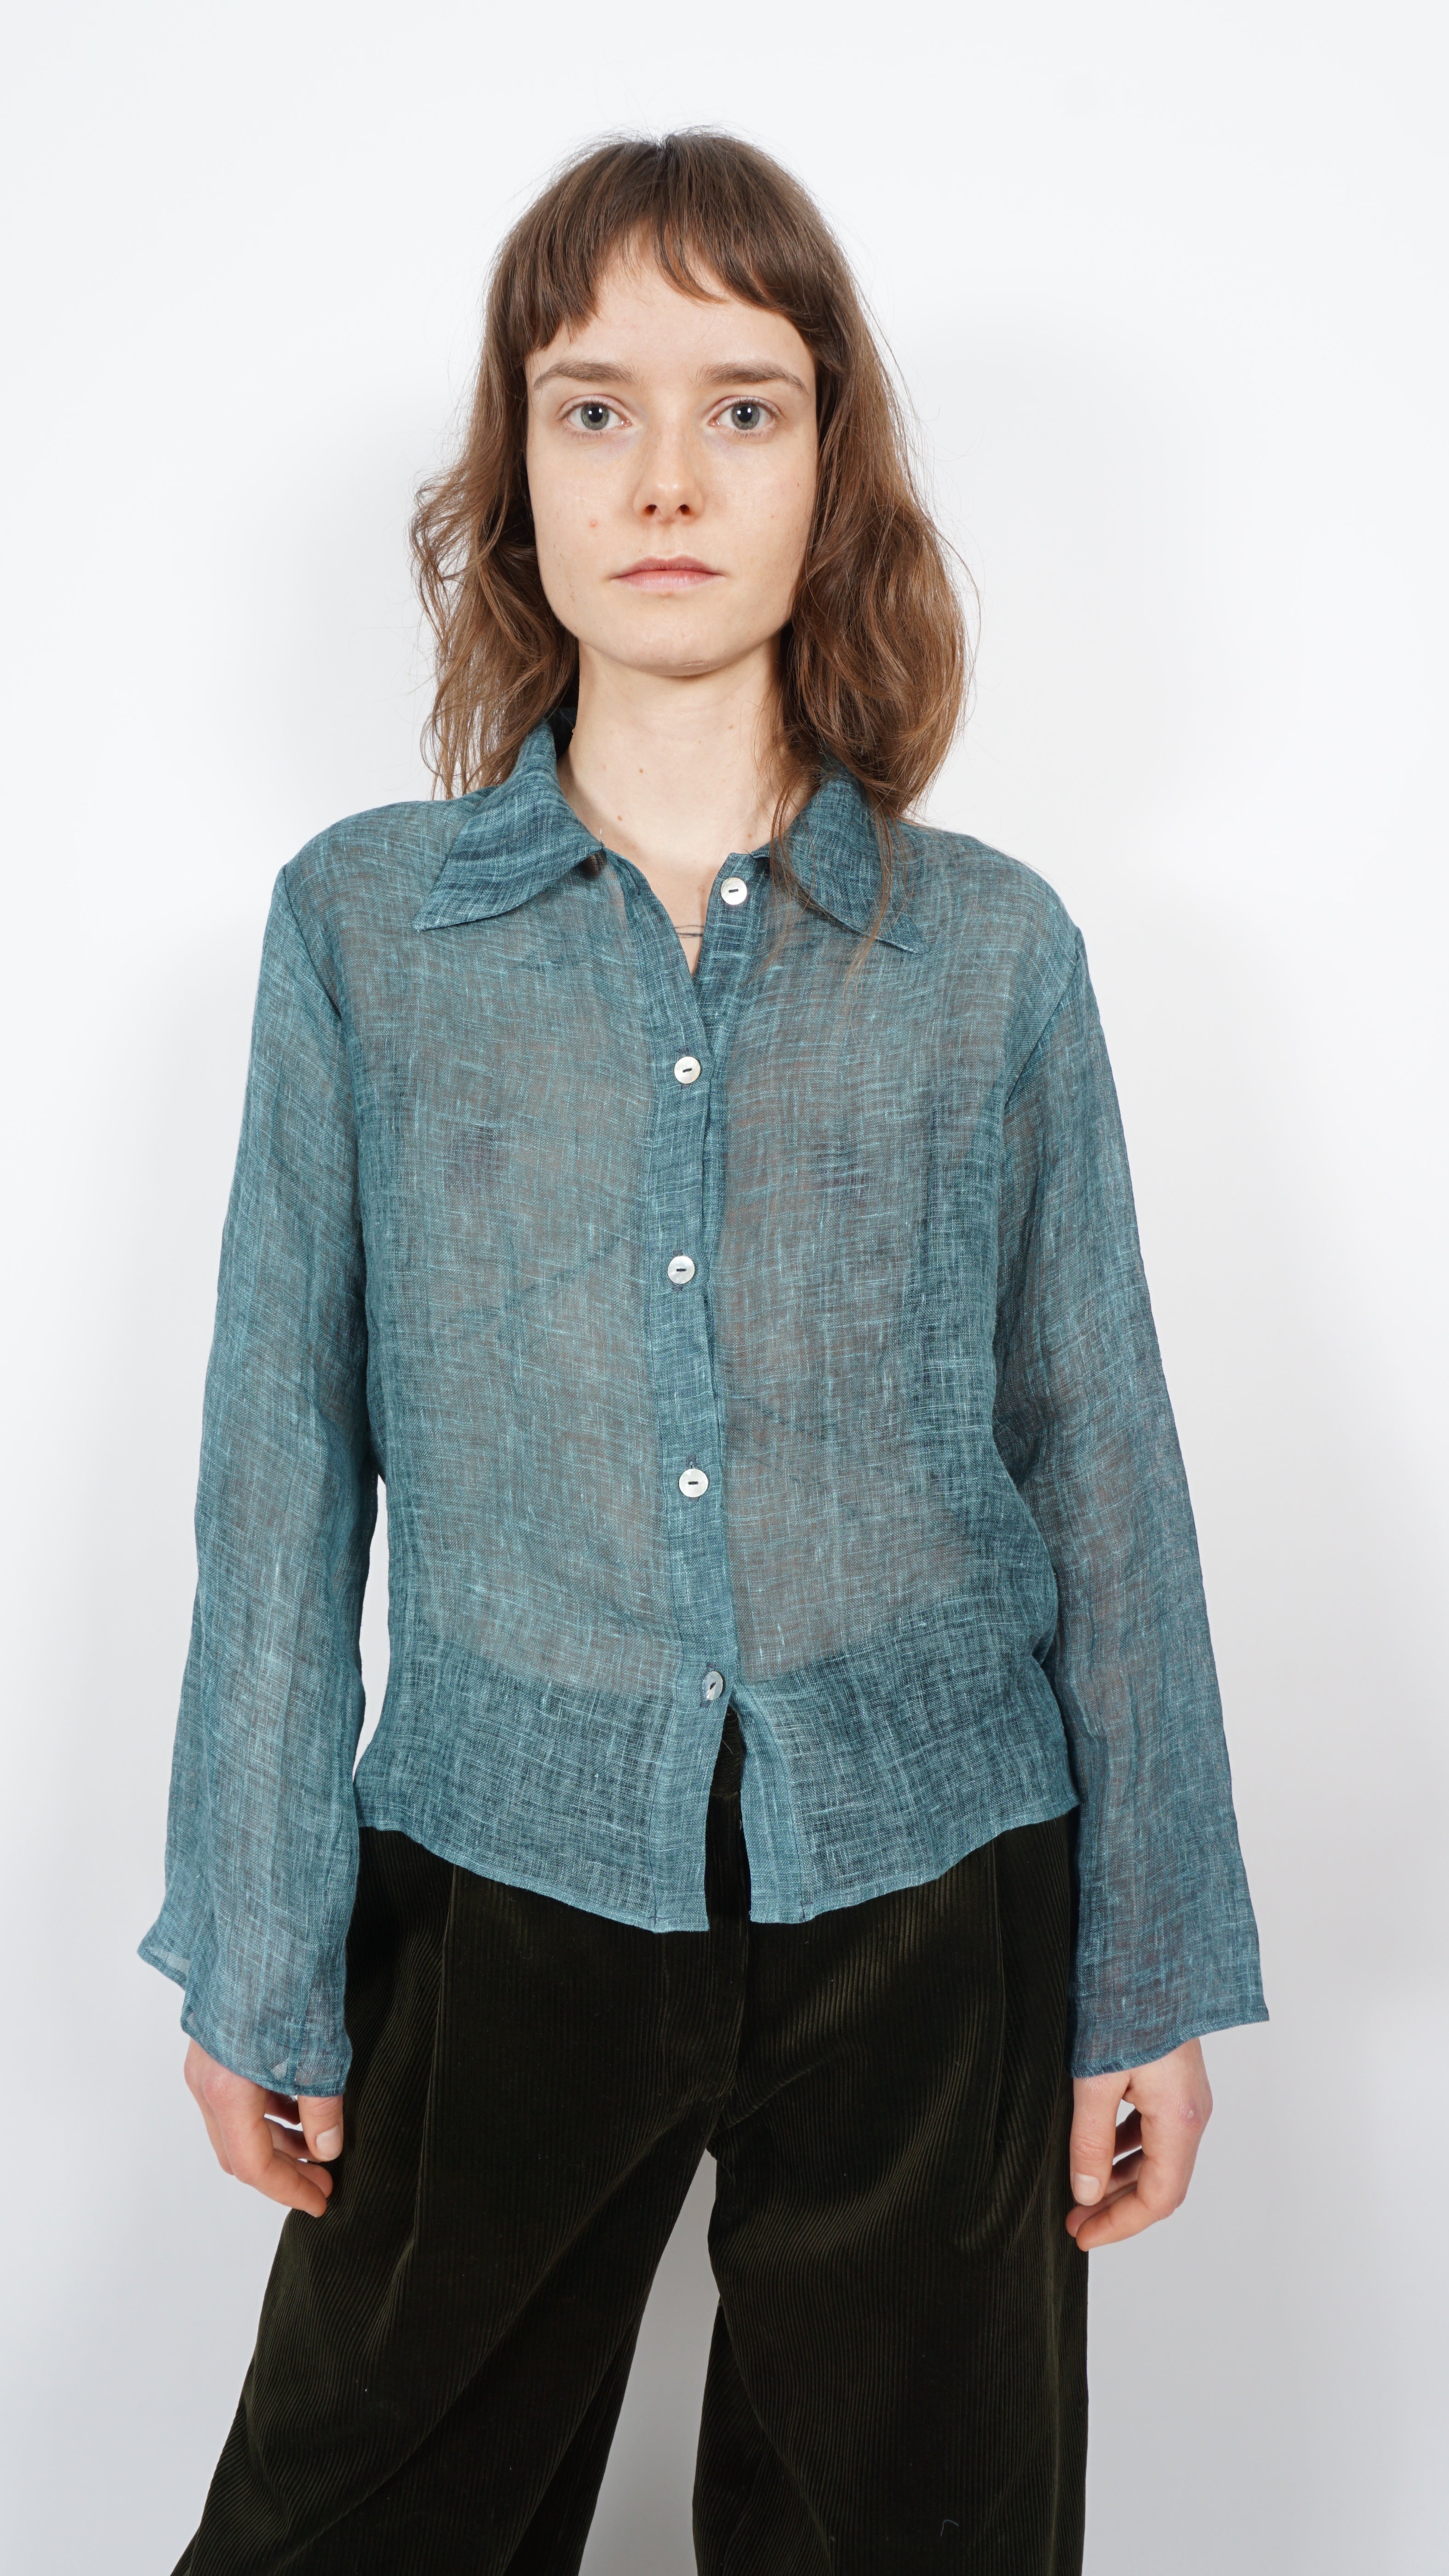 Linen shirt by Maria Holm